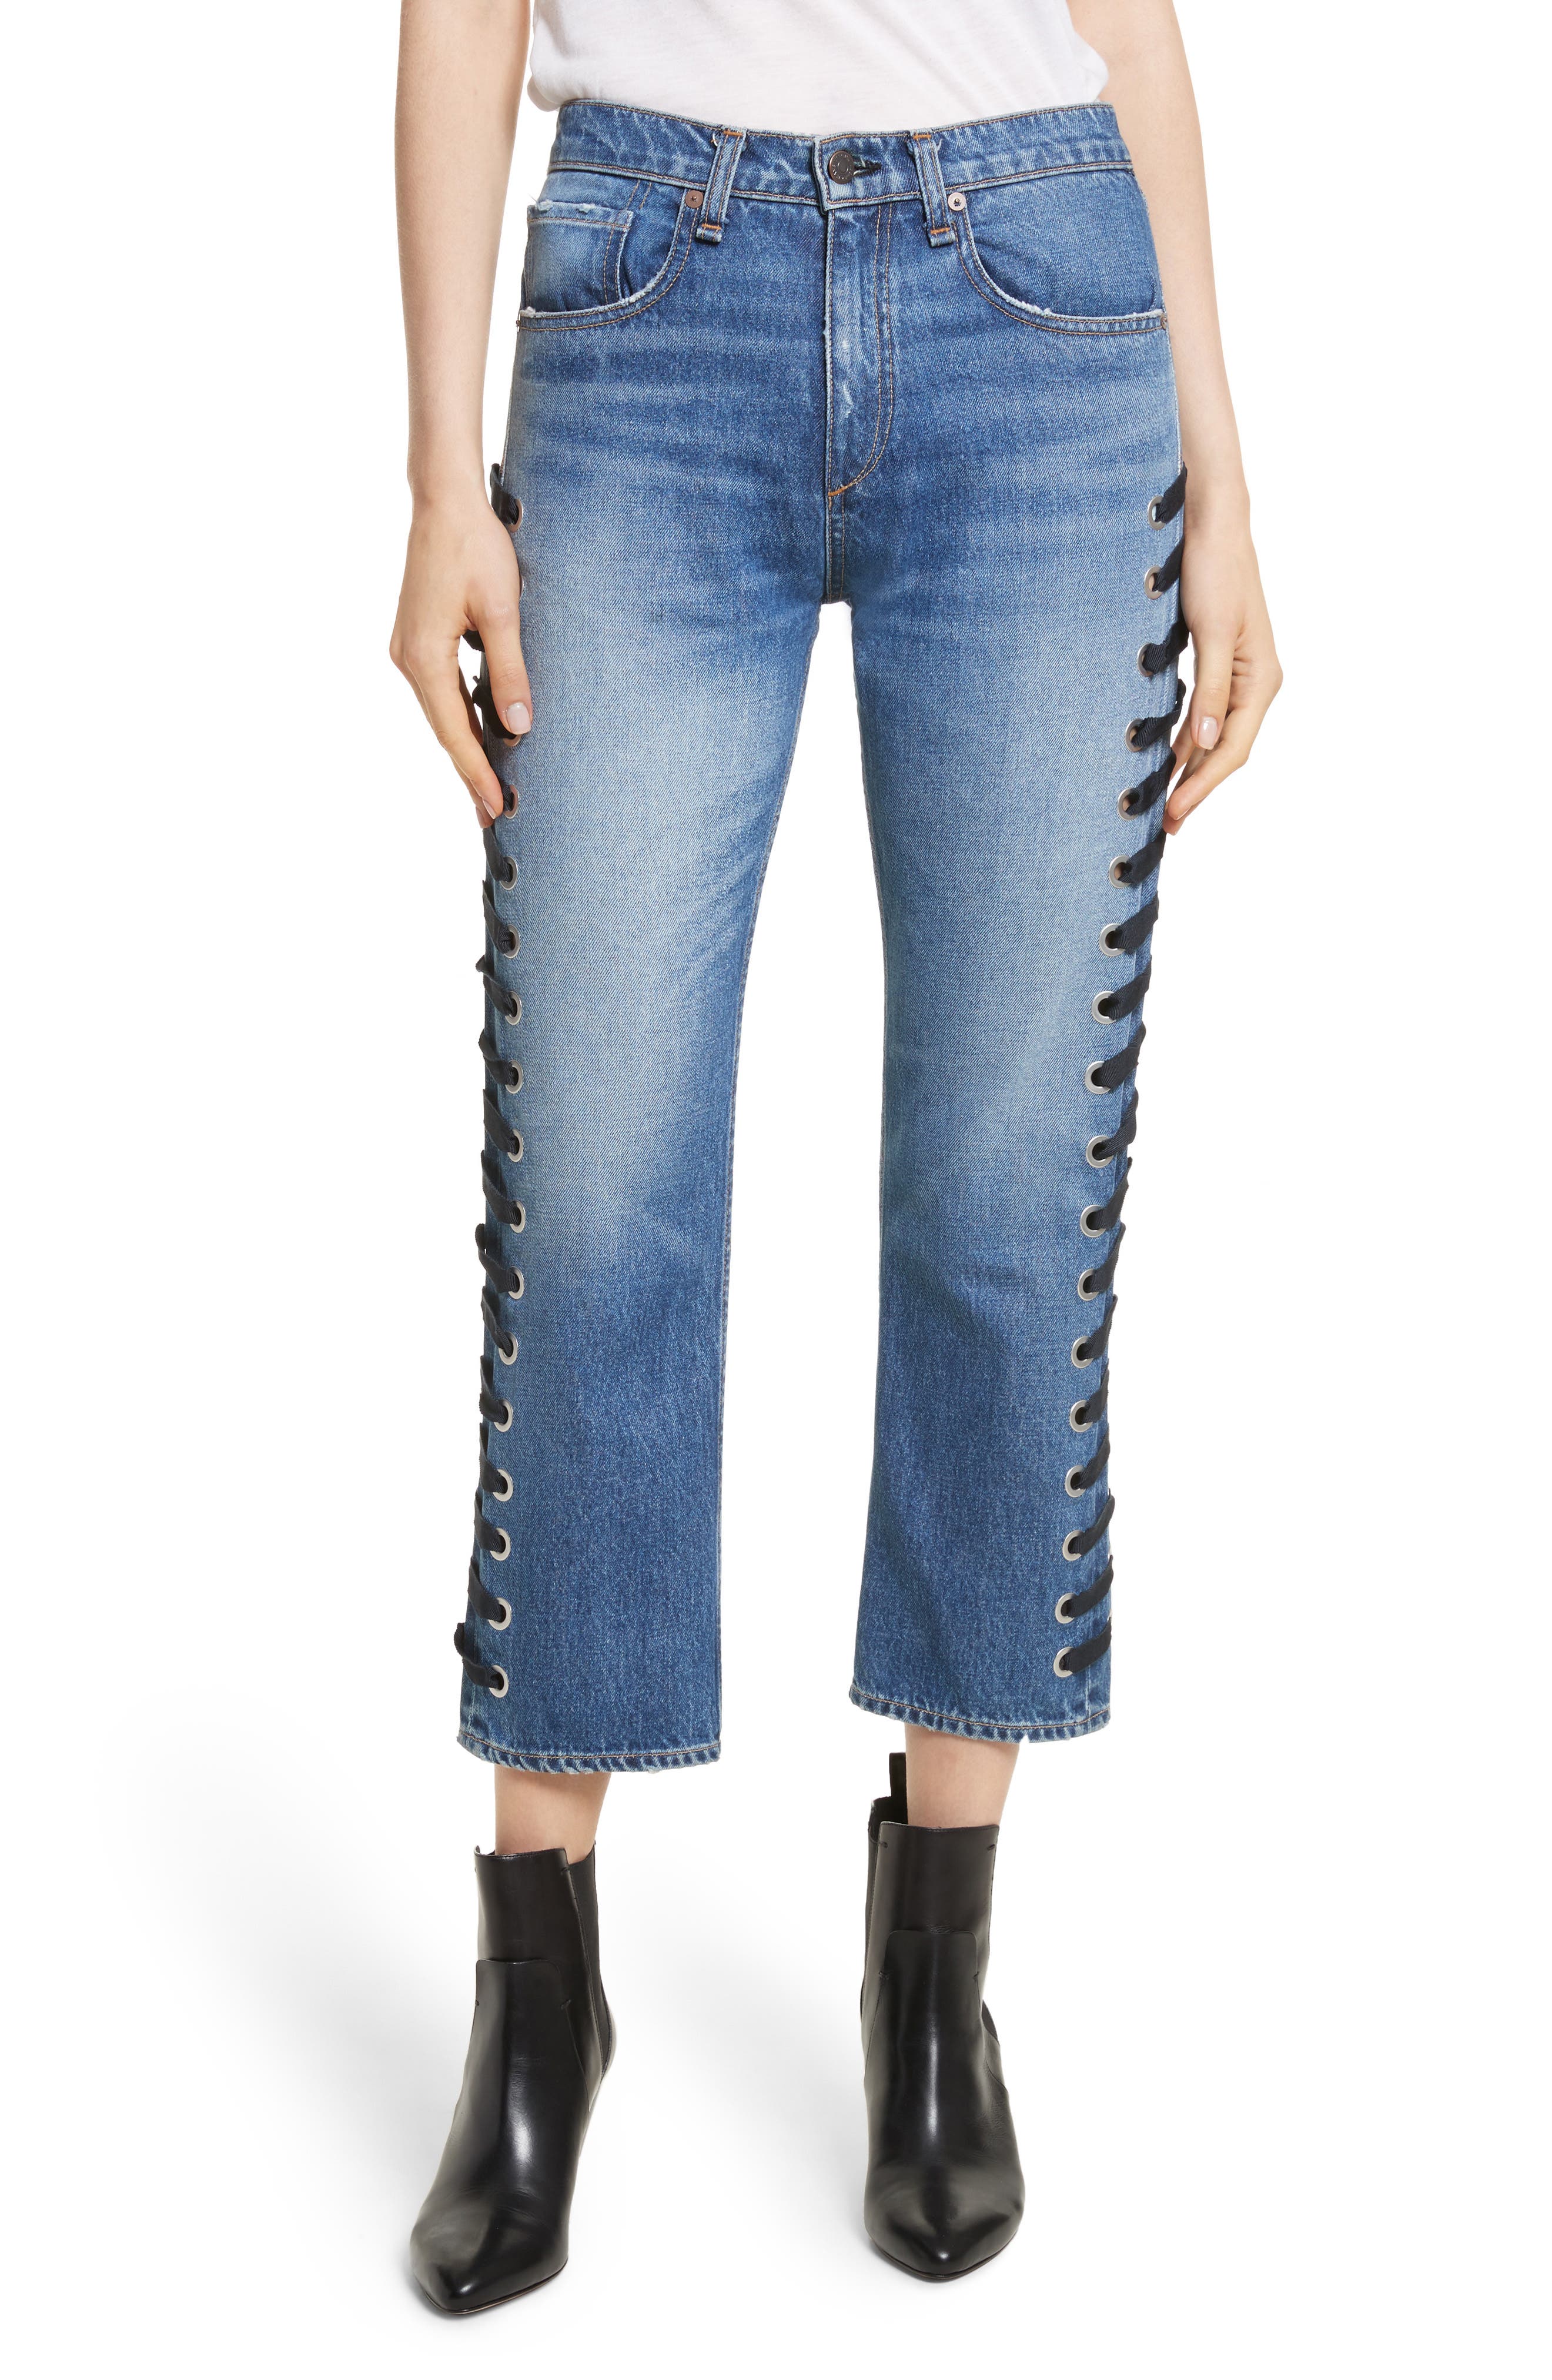 pacsun stacked skinny black jeans